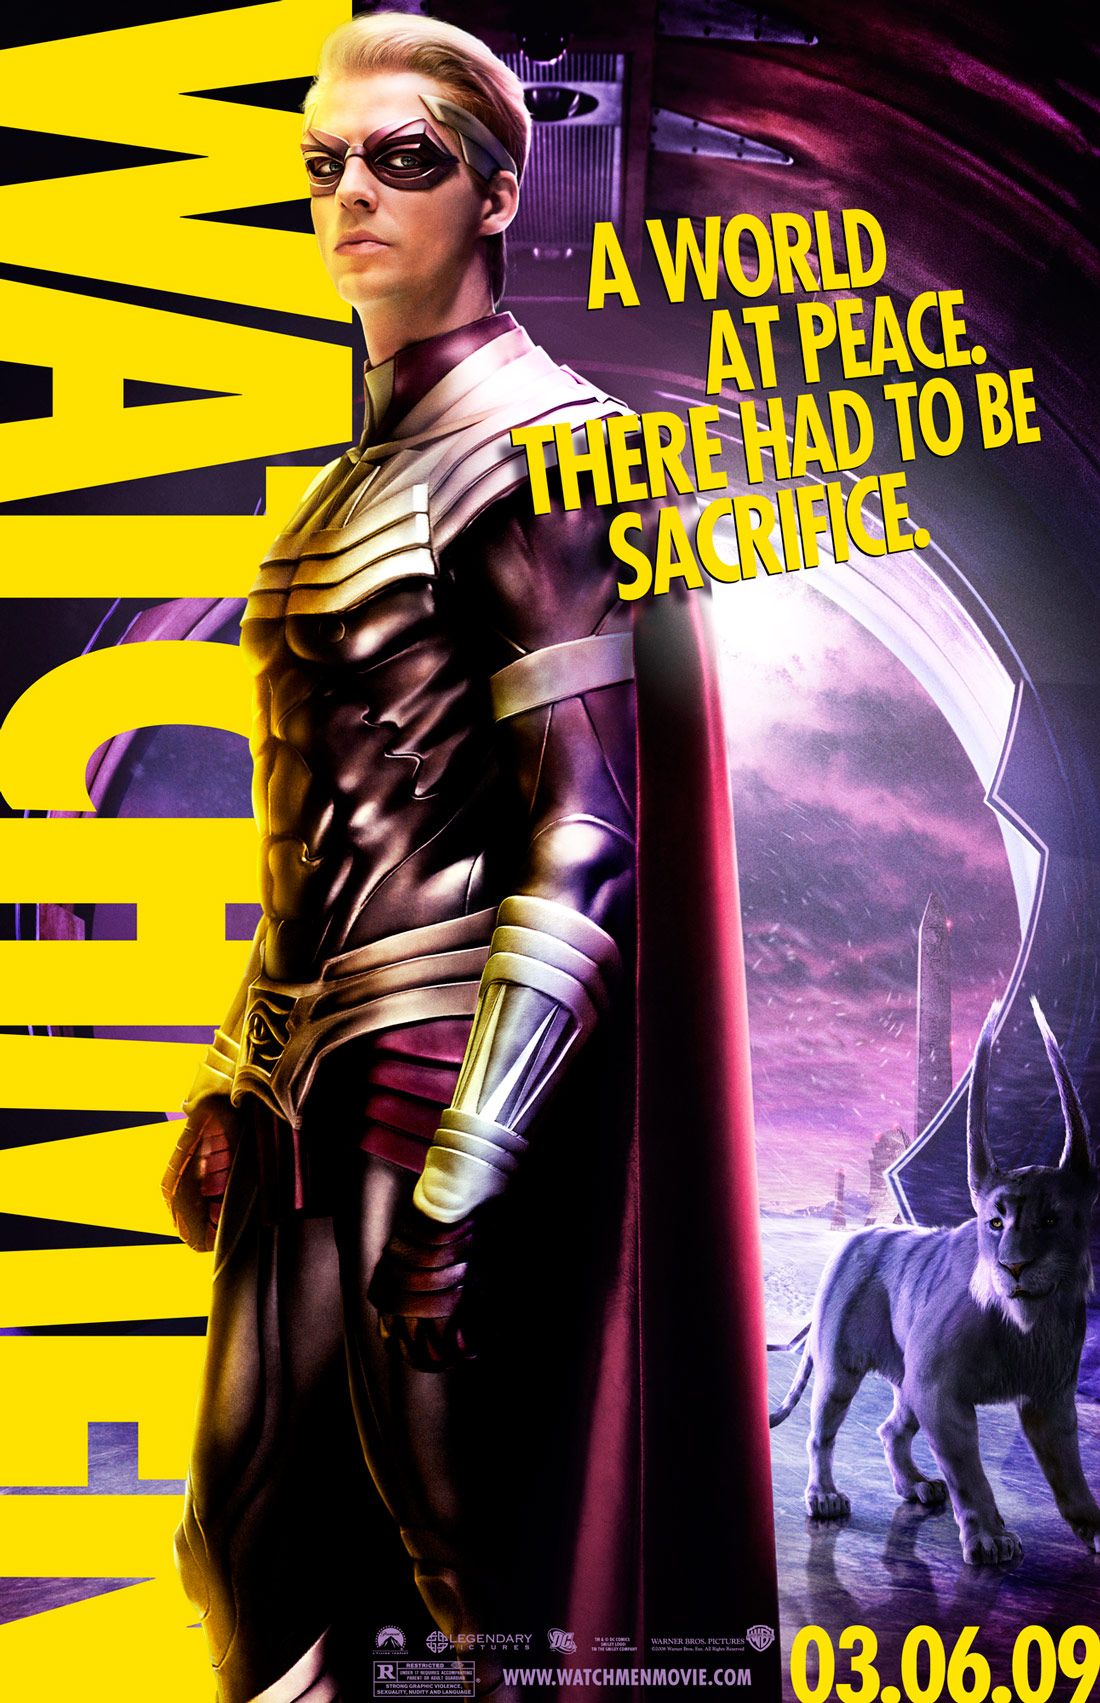 Watchmen Character Poster #2